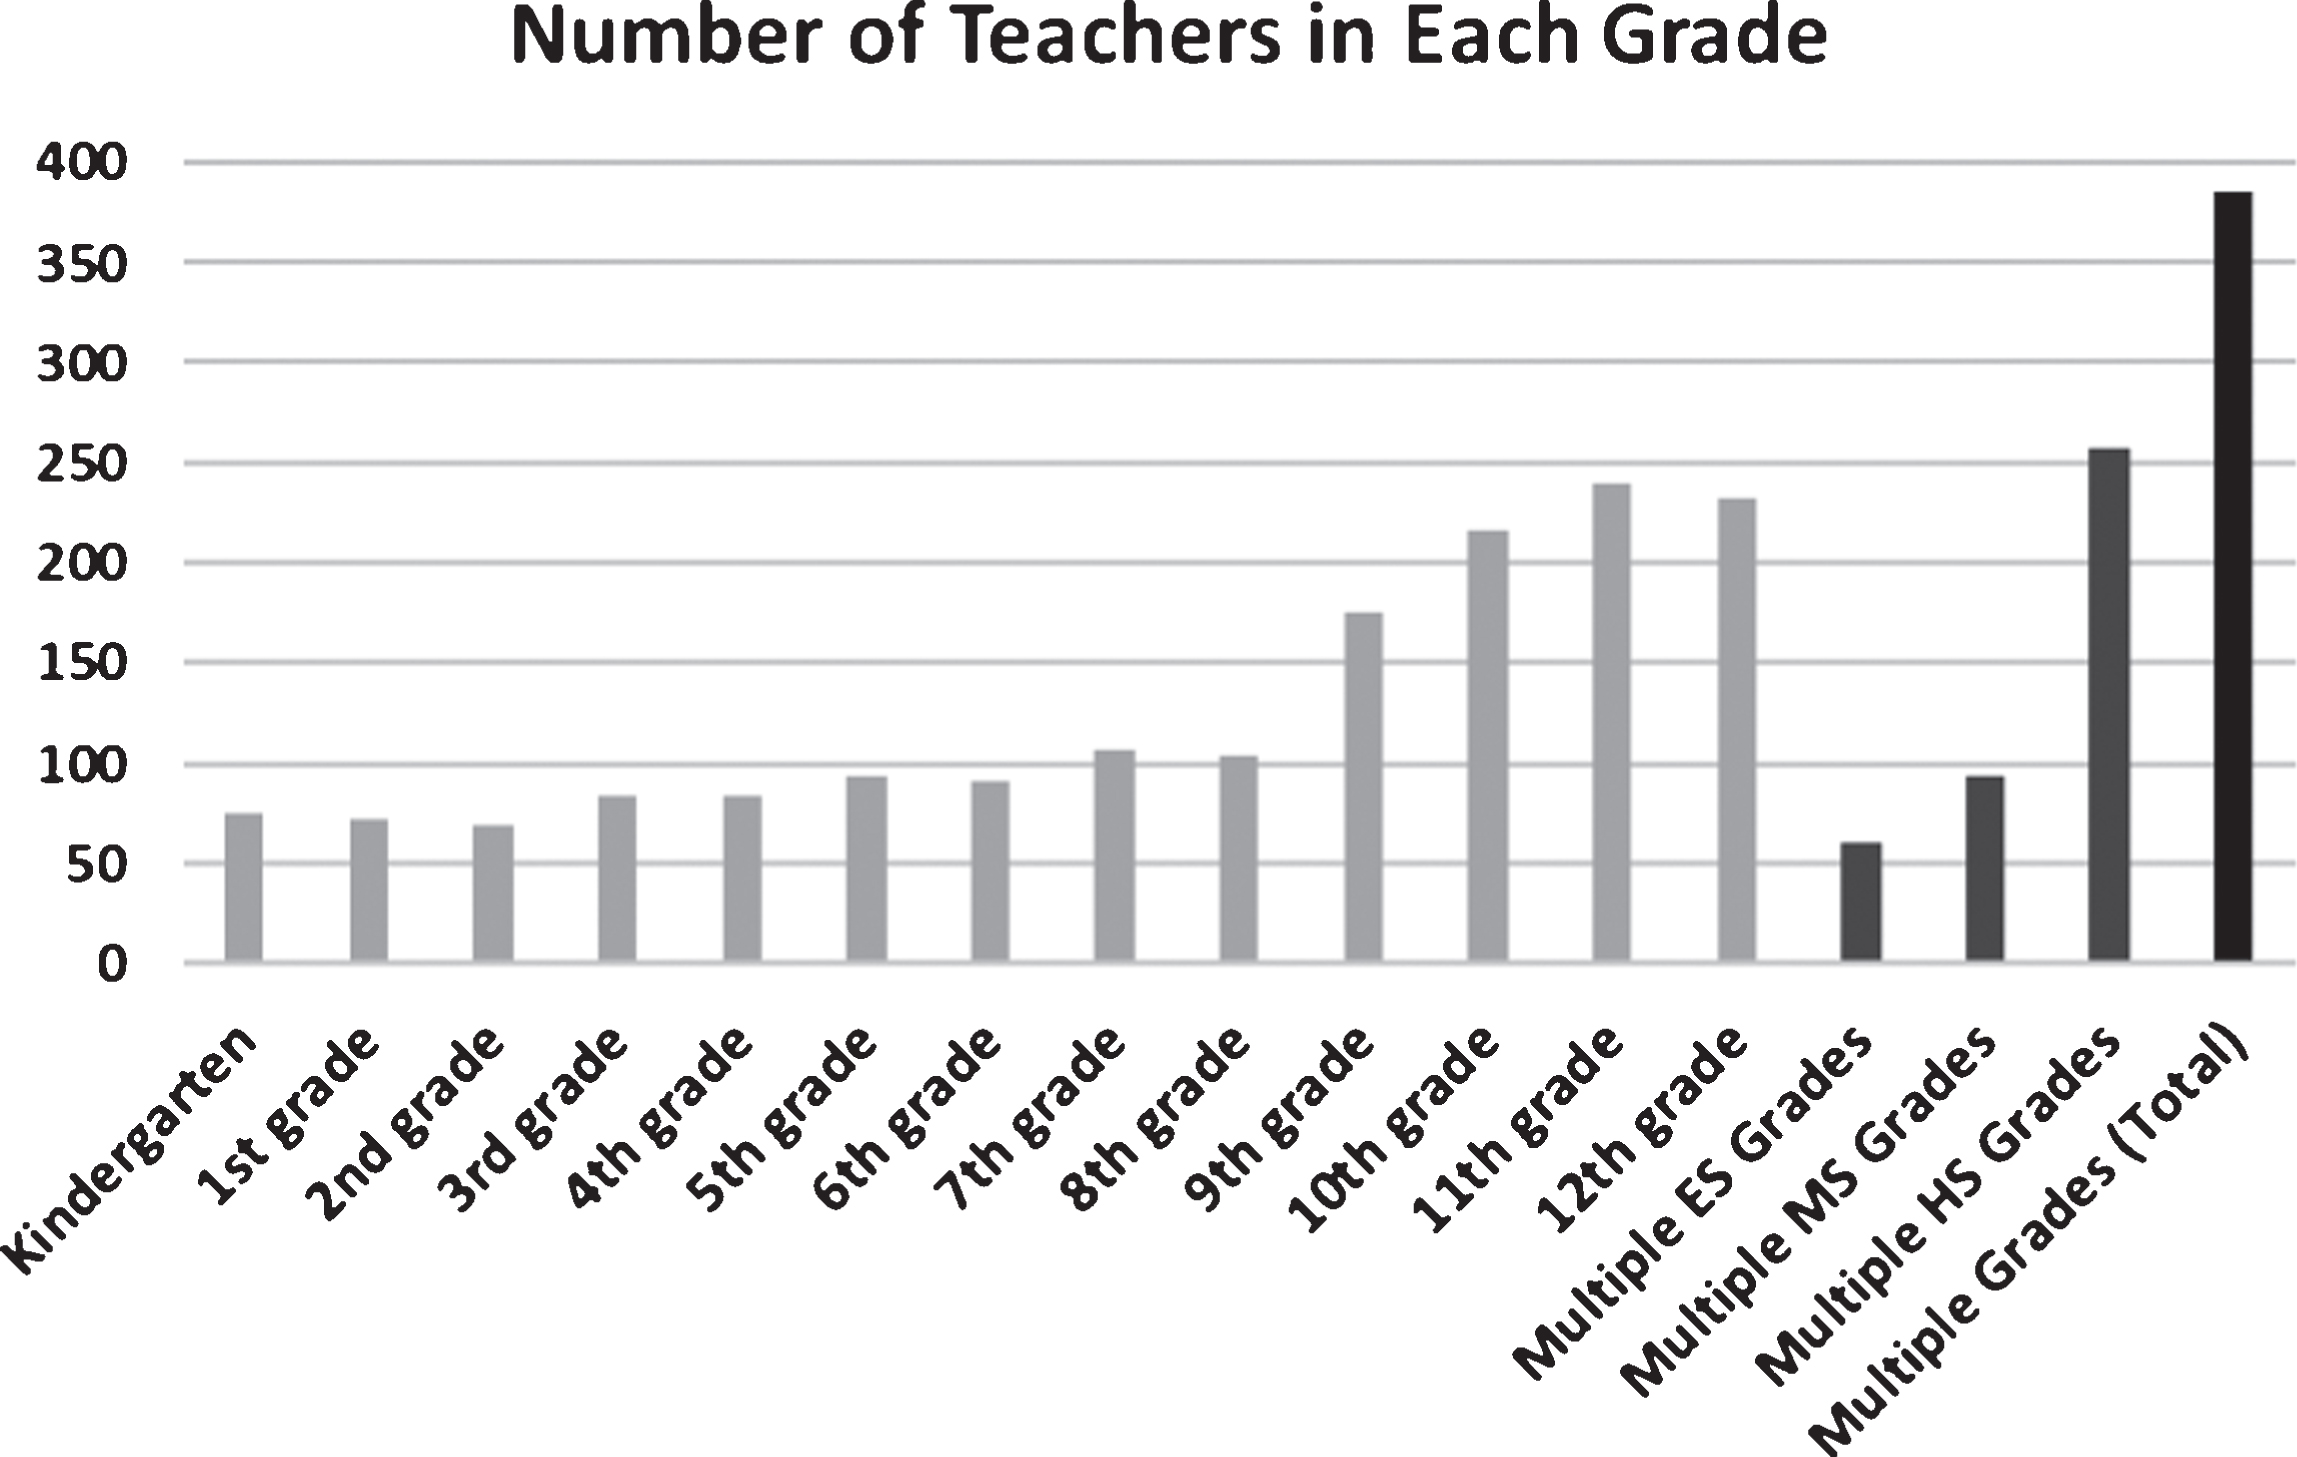 Number of teachers completing the survey in each of the grades with multiple grades representing teachers who teach across grade levels. ES: Elementary, MS: Middle school, HS: High school, Total: Number across all schools.